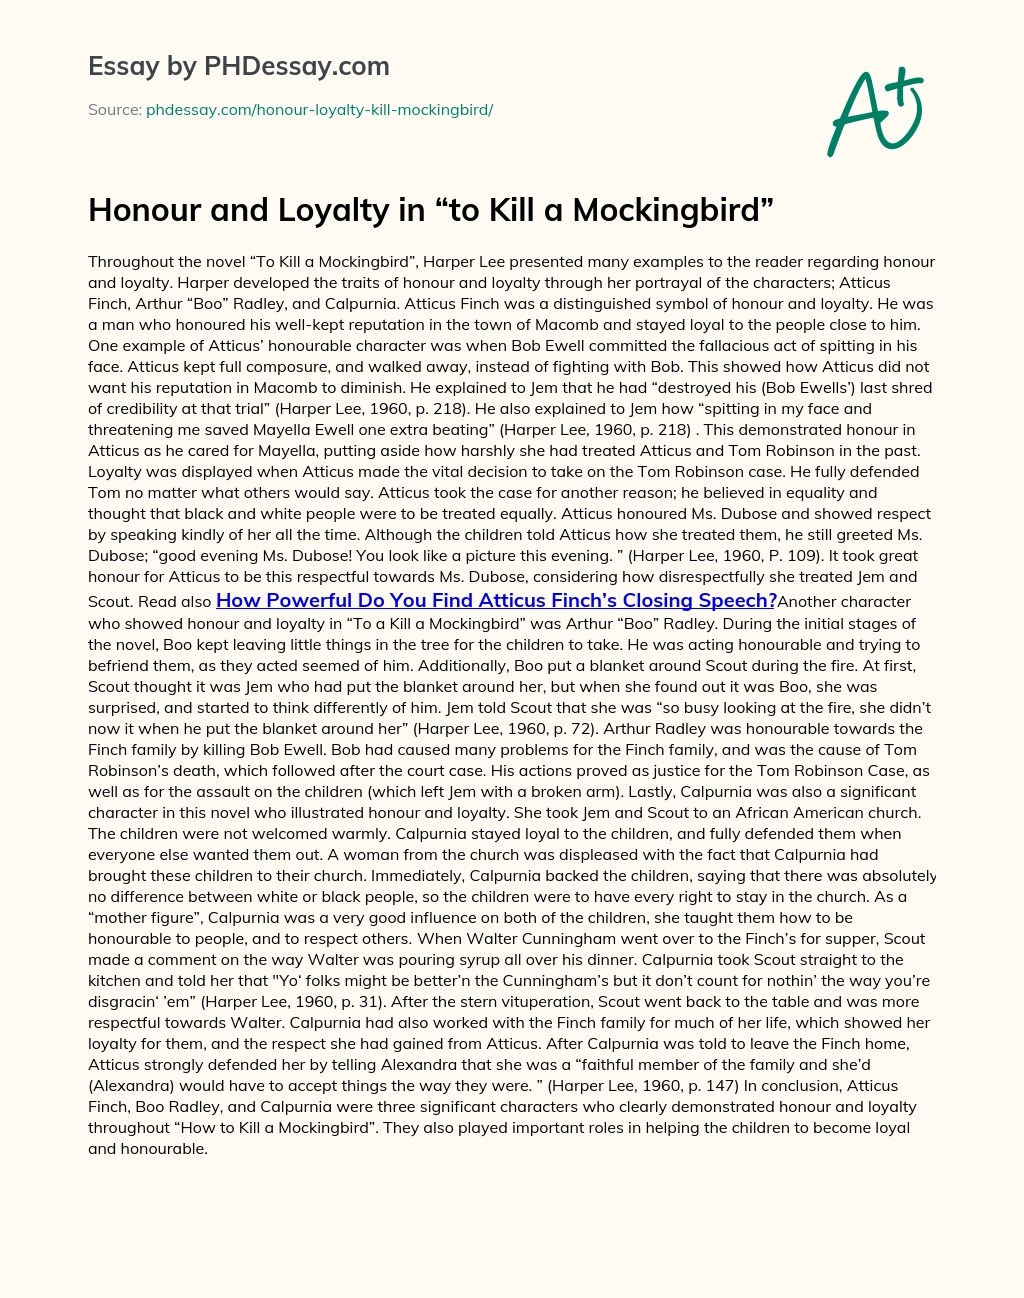 Honour and Loyalty in “to Kill a Mockingbird” essay